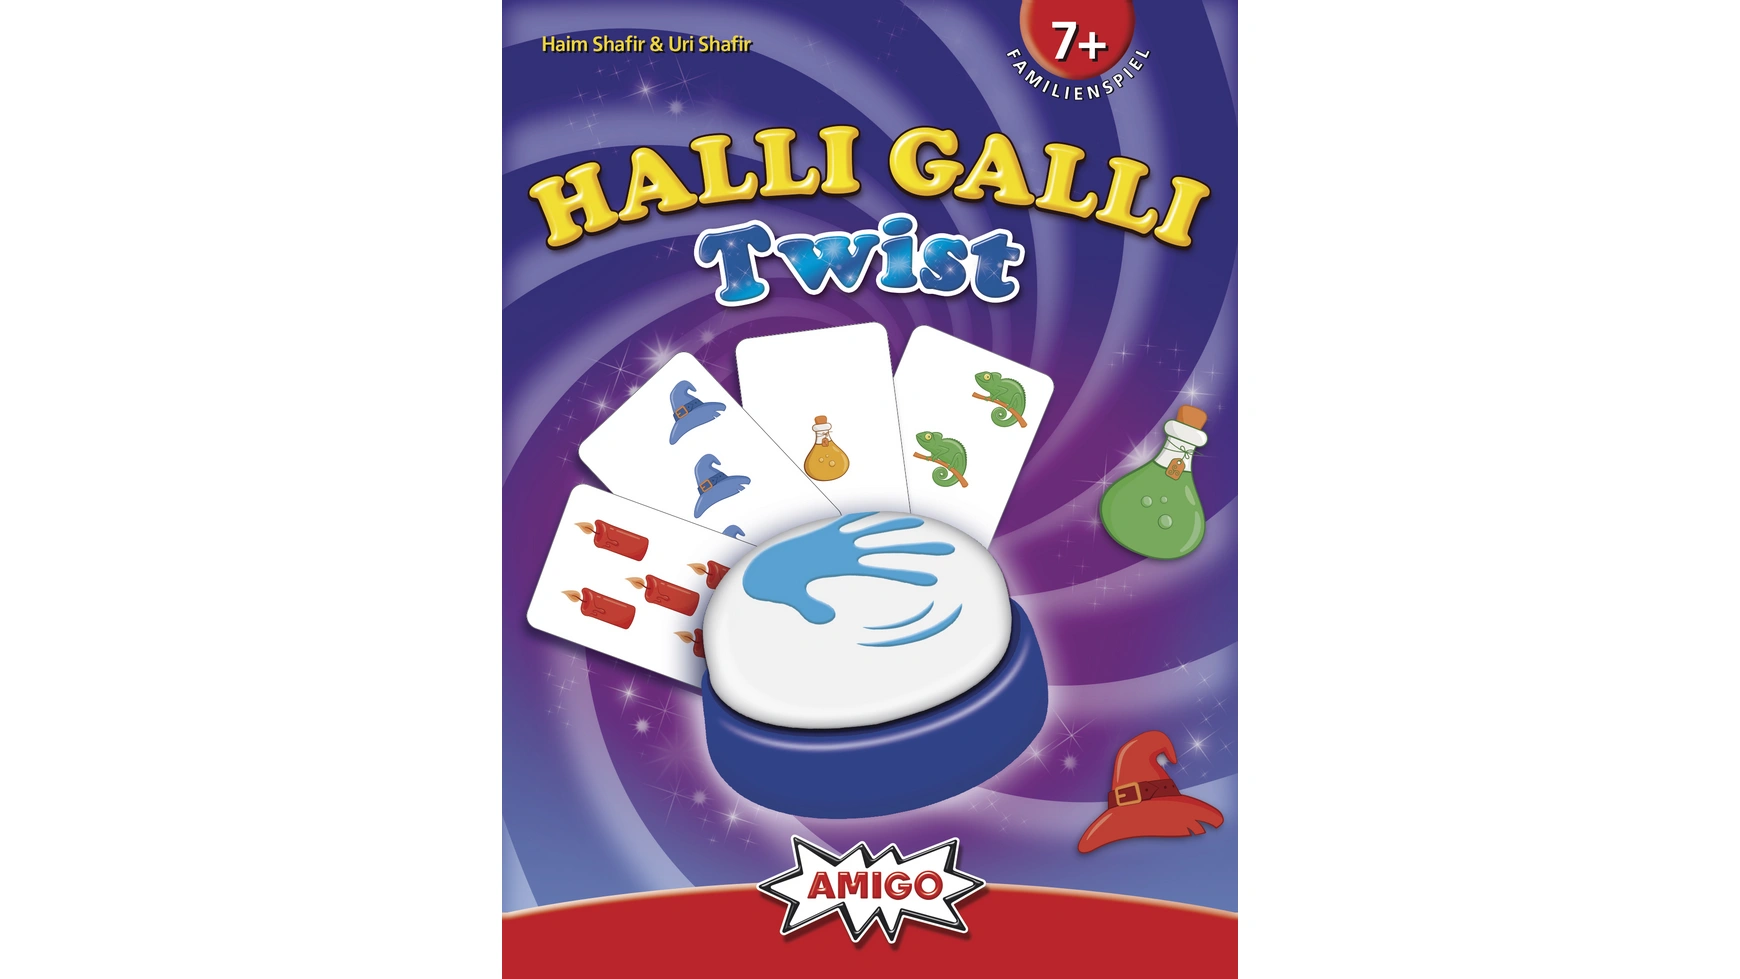 Игры Amigo Халли Галли Твист 2 type halli galli board game 2 6 players family fruity extreme version with metal bell speed action game